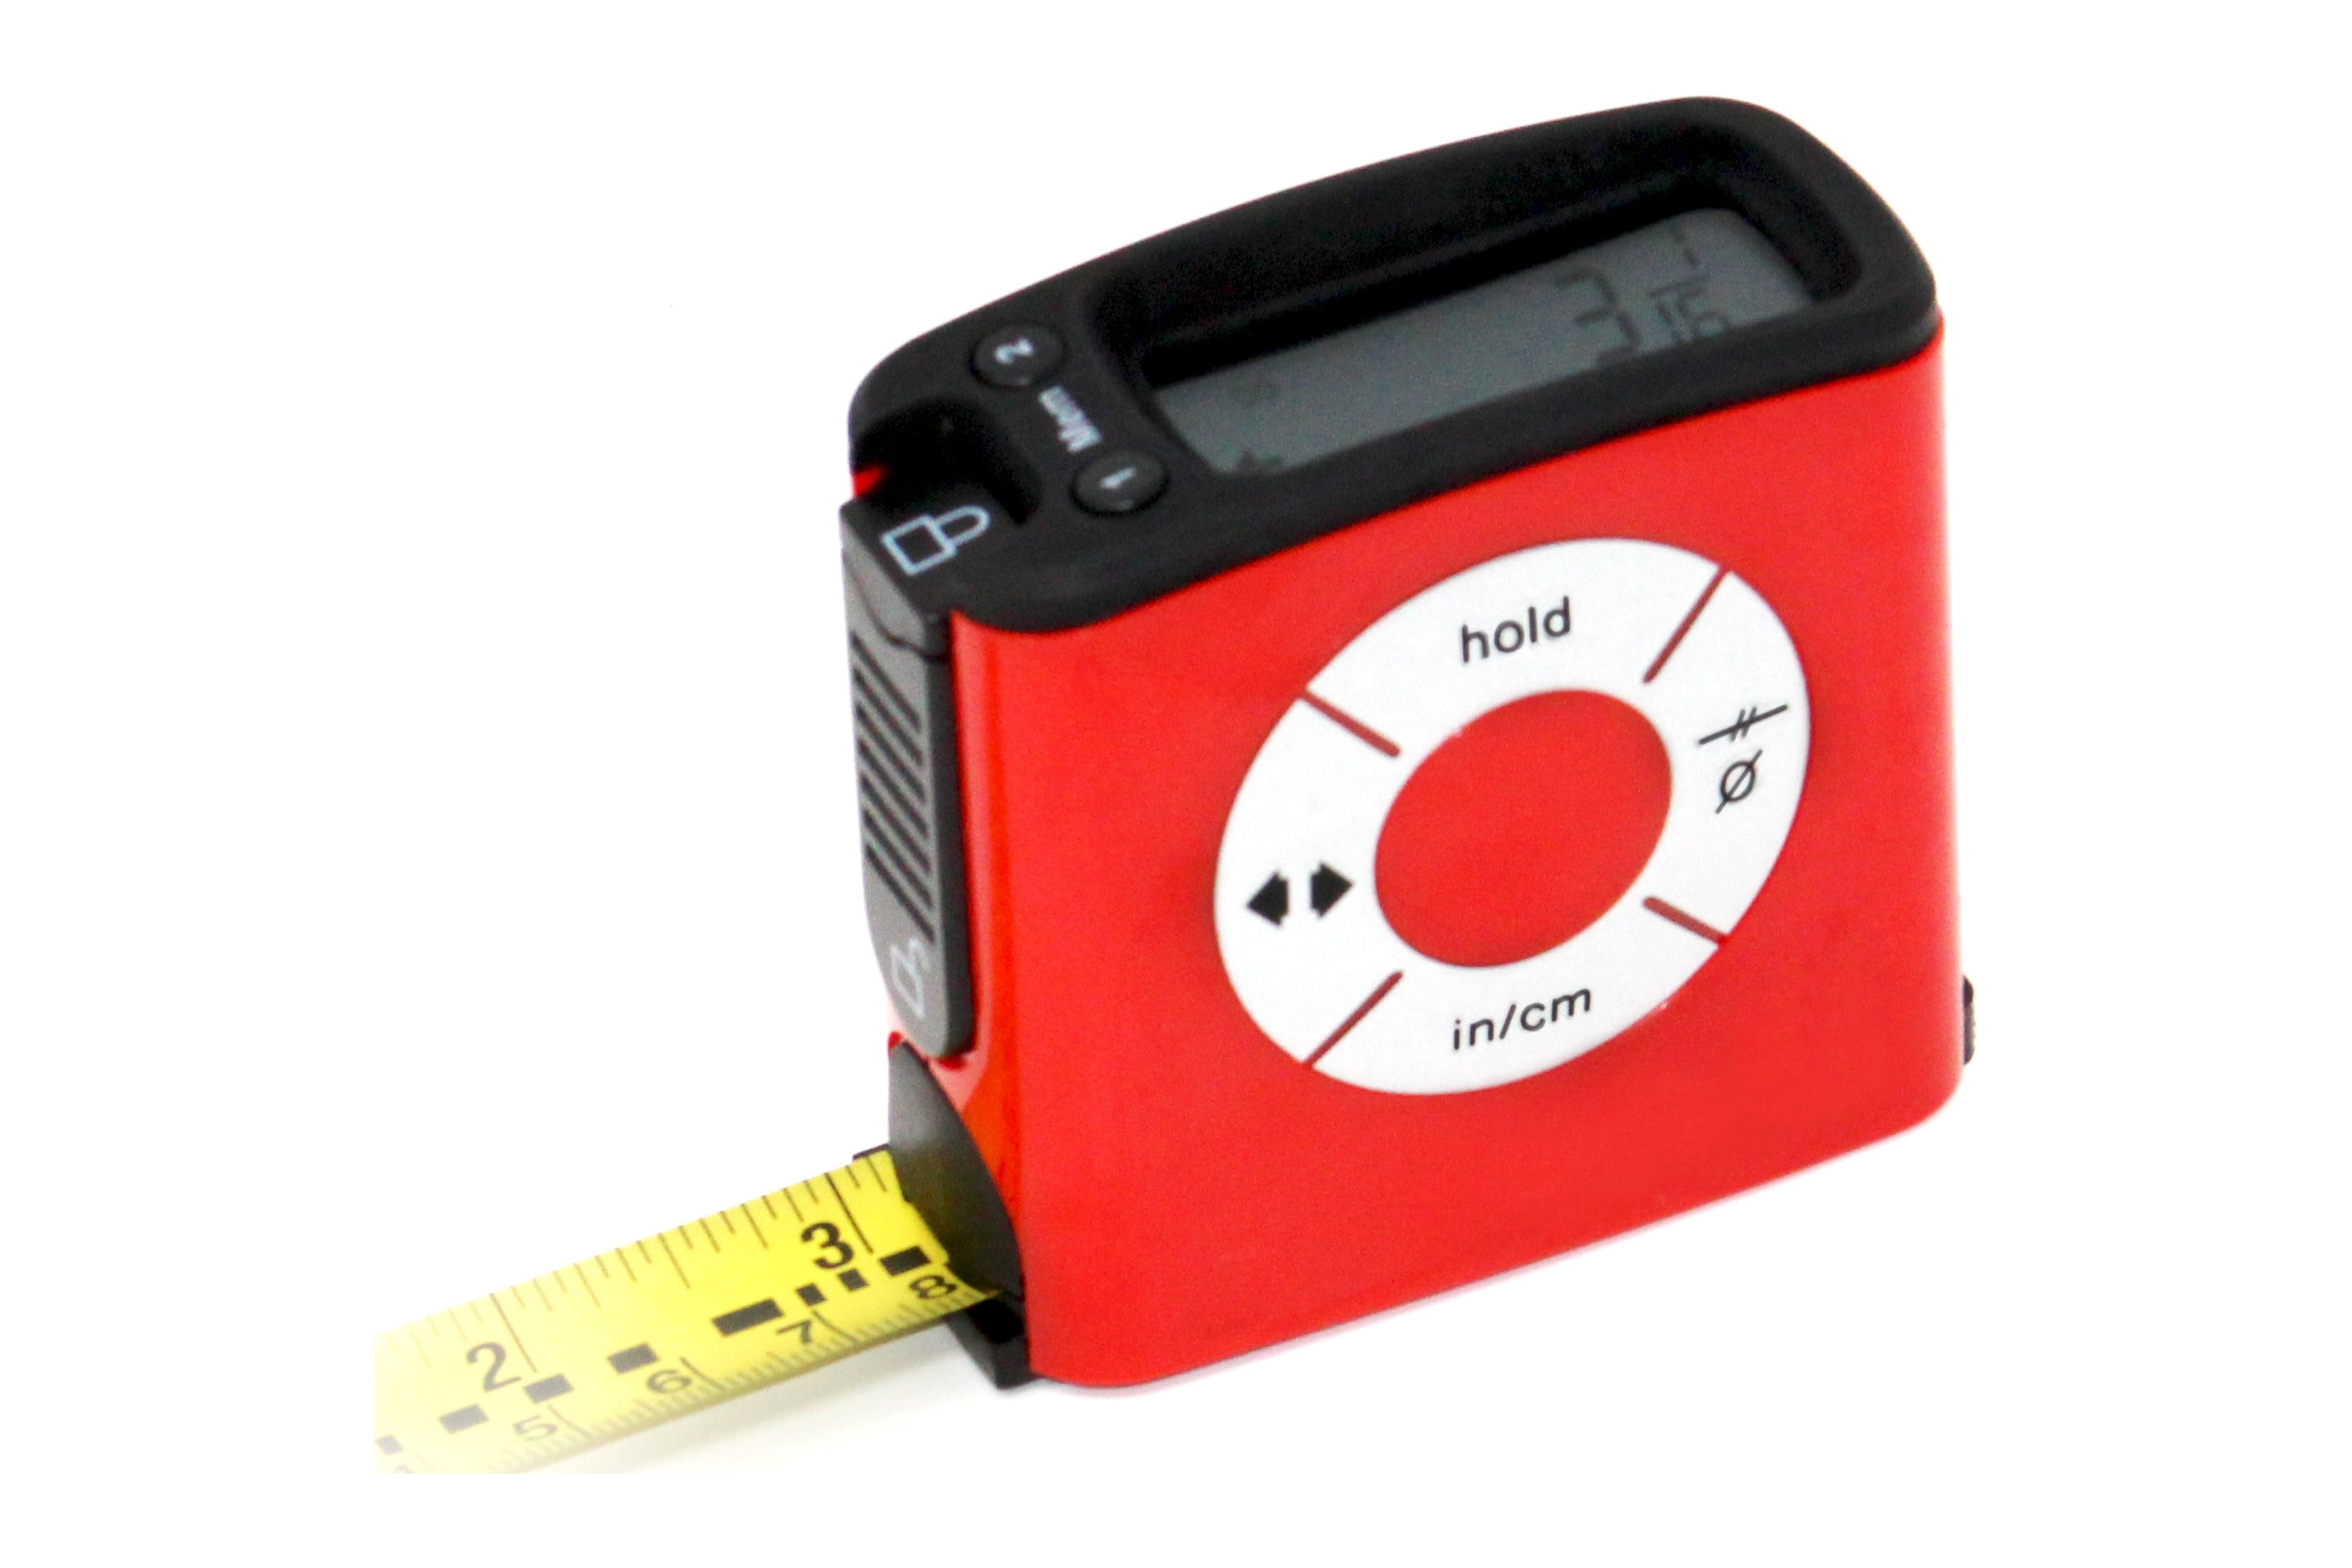 6 Pieces Tape Measures, 25 ft /16 ft/12 ft Measuring Tape Retractable,Easy Read Measurement Tape with Fractions,Self-Locking Tape Measure for